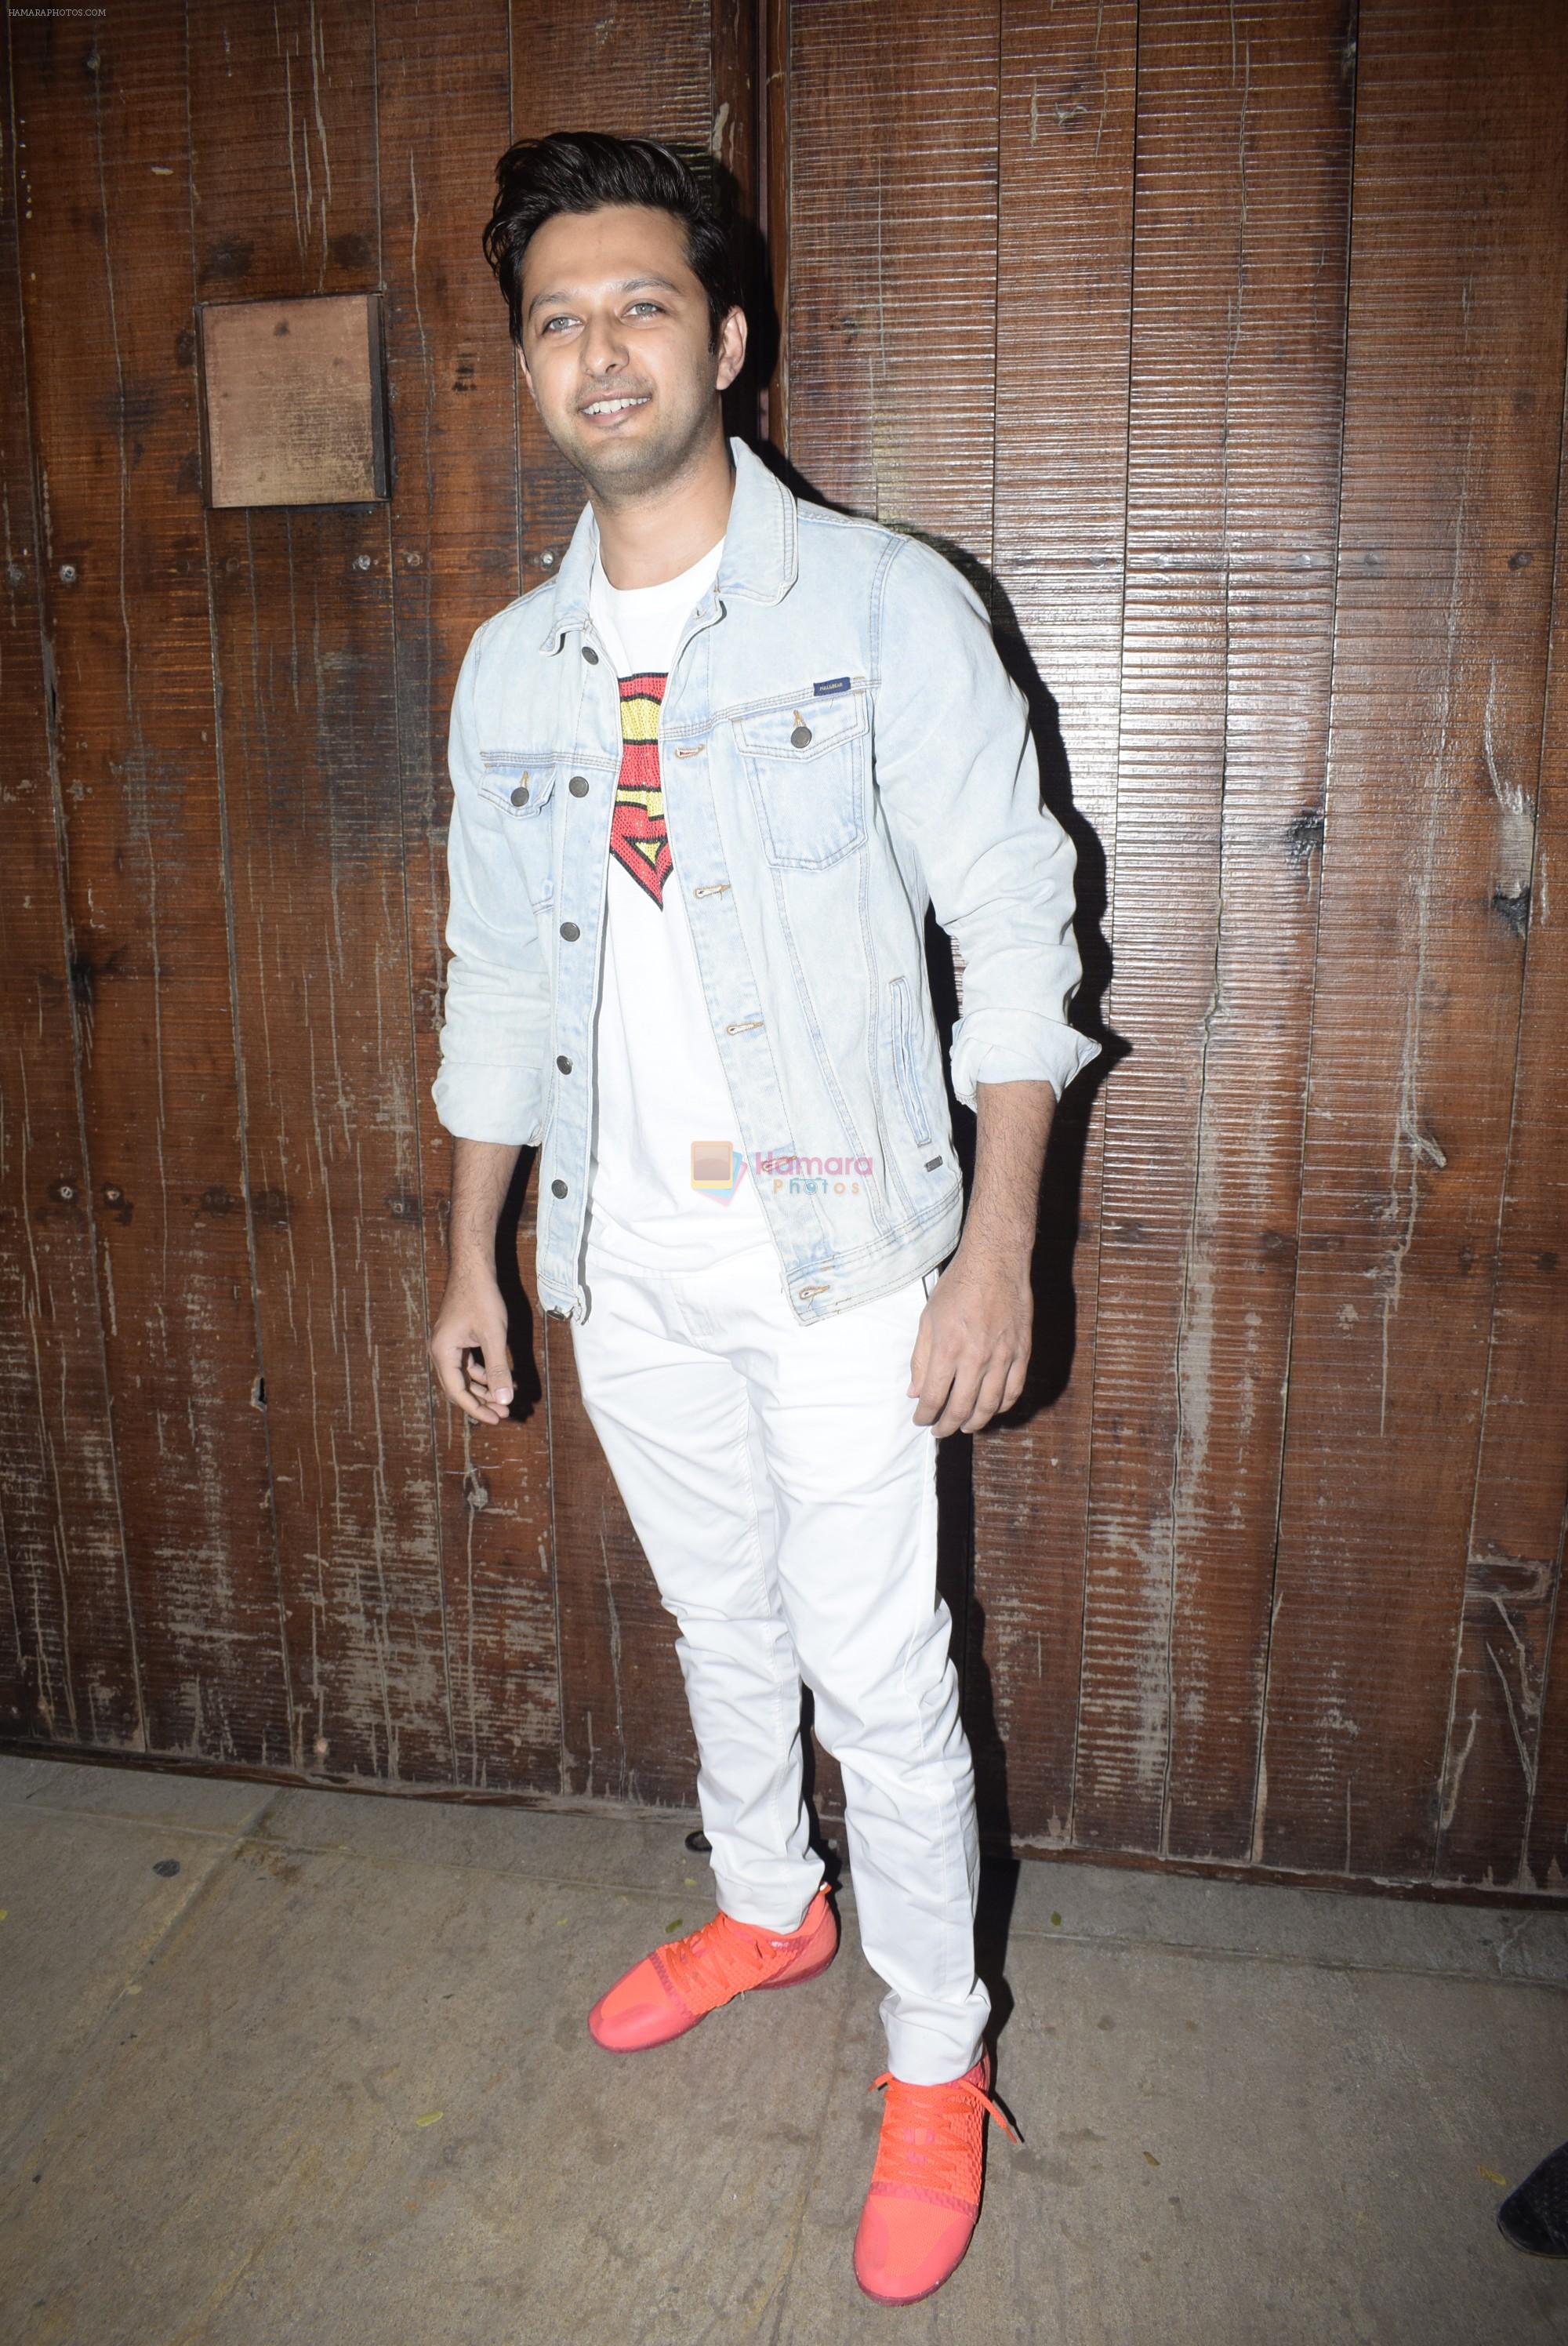 Vatsal Seth at Bobby Deol's birthday party at his home in juhu on 27th Jan 2019